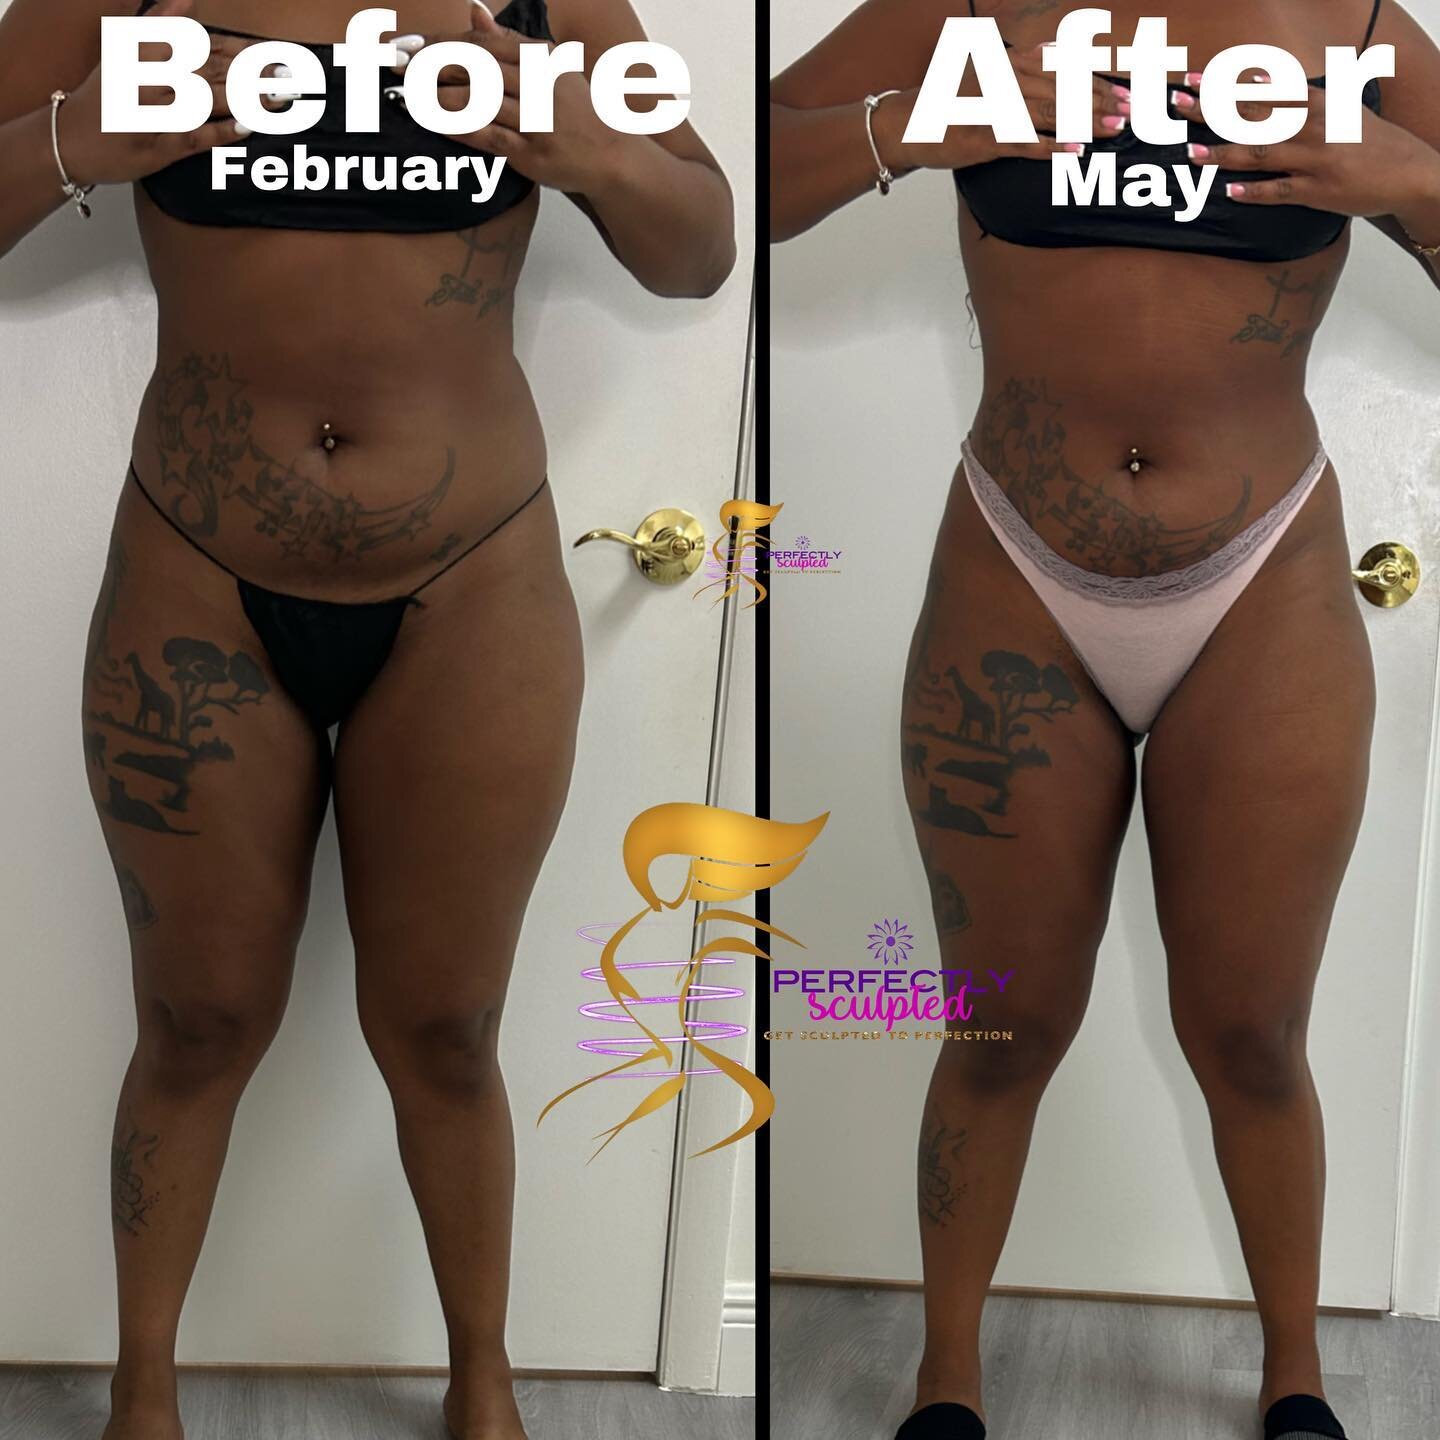 Wow ‼️‼️ look at this 4 month transformation 😁‼️❤️ NON SURGICAL BODY SCULPTING WORKS .